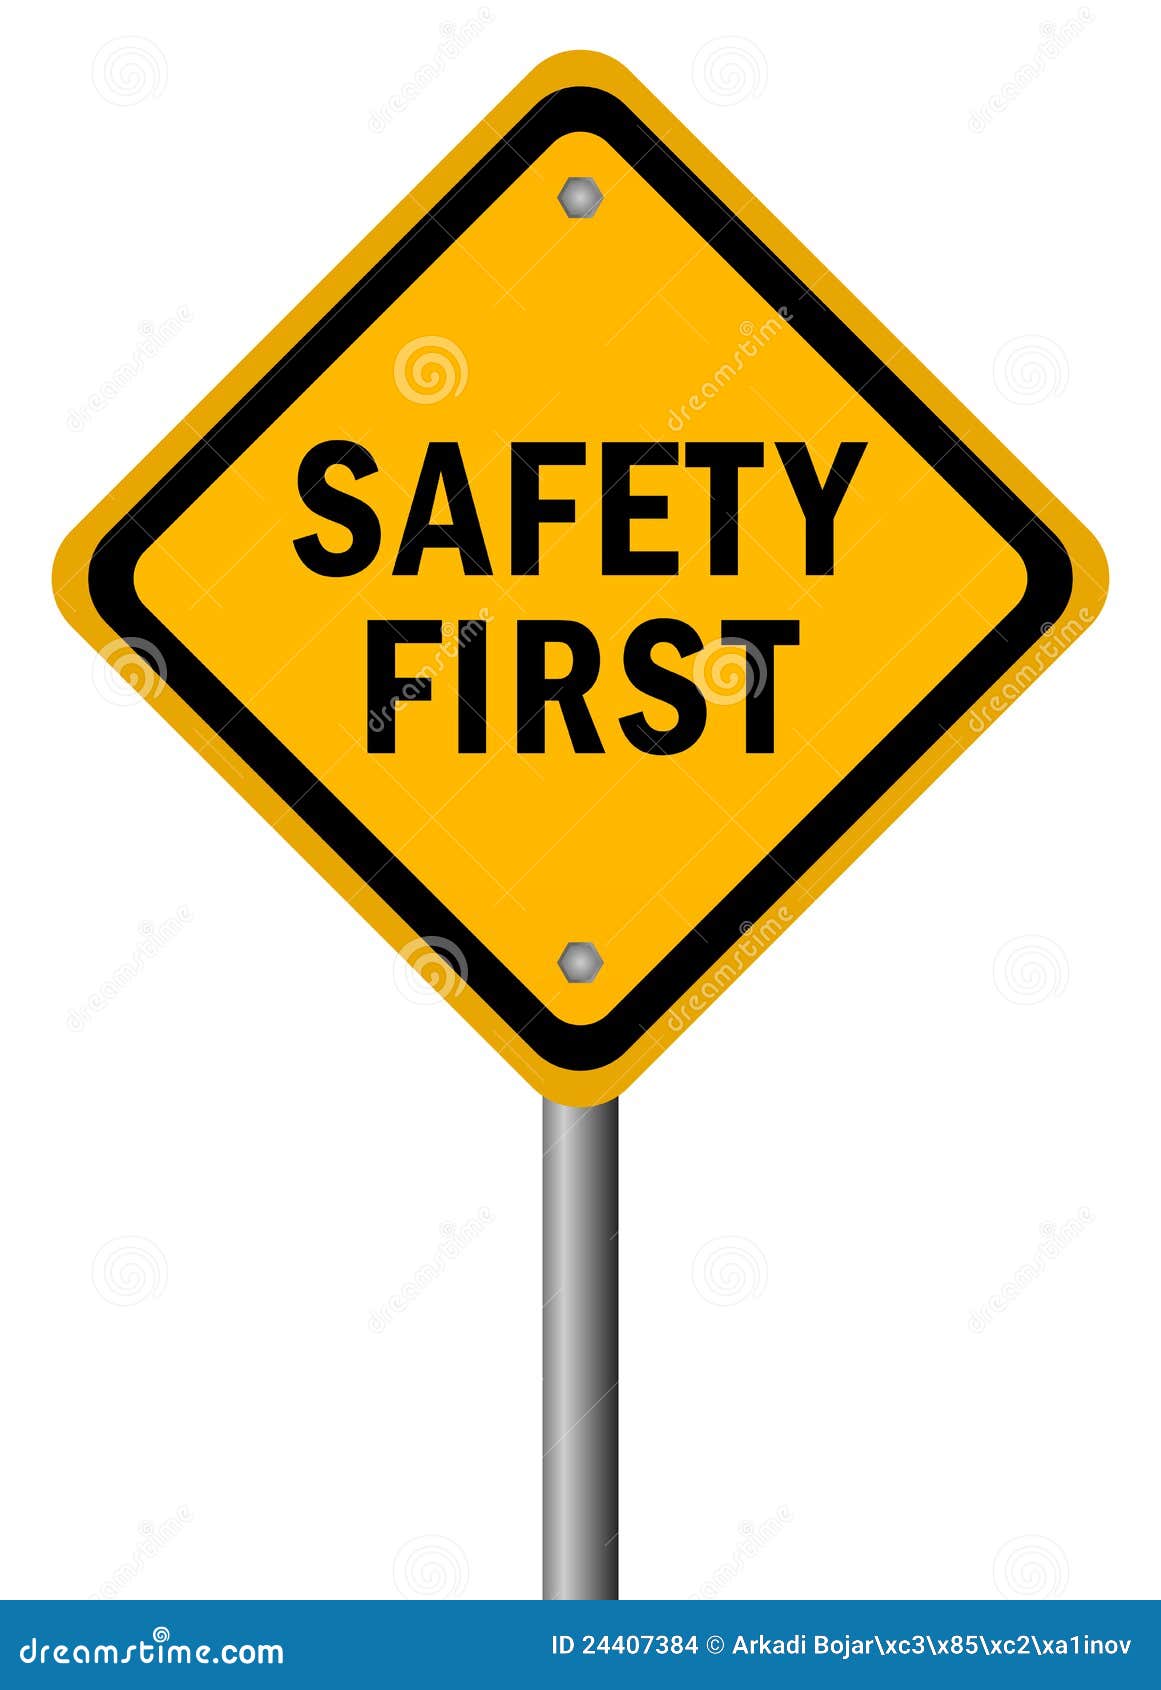 safety clipart - photo #45